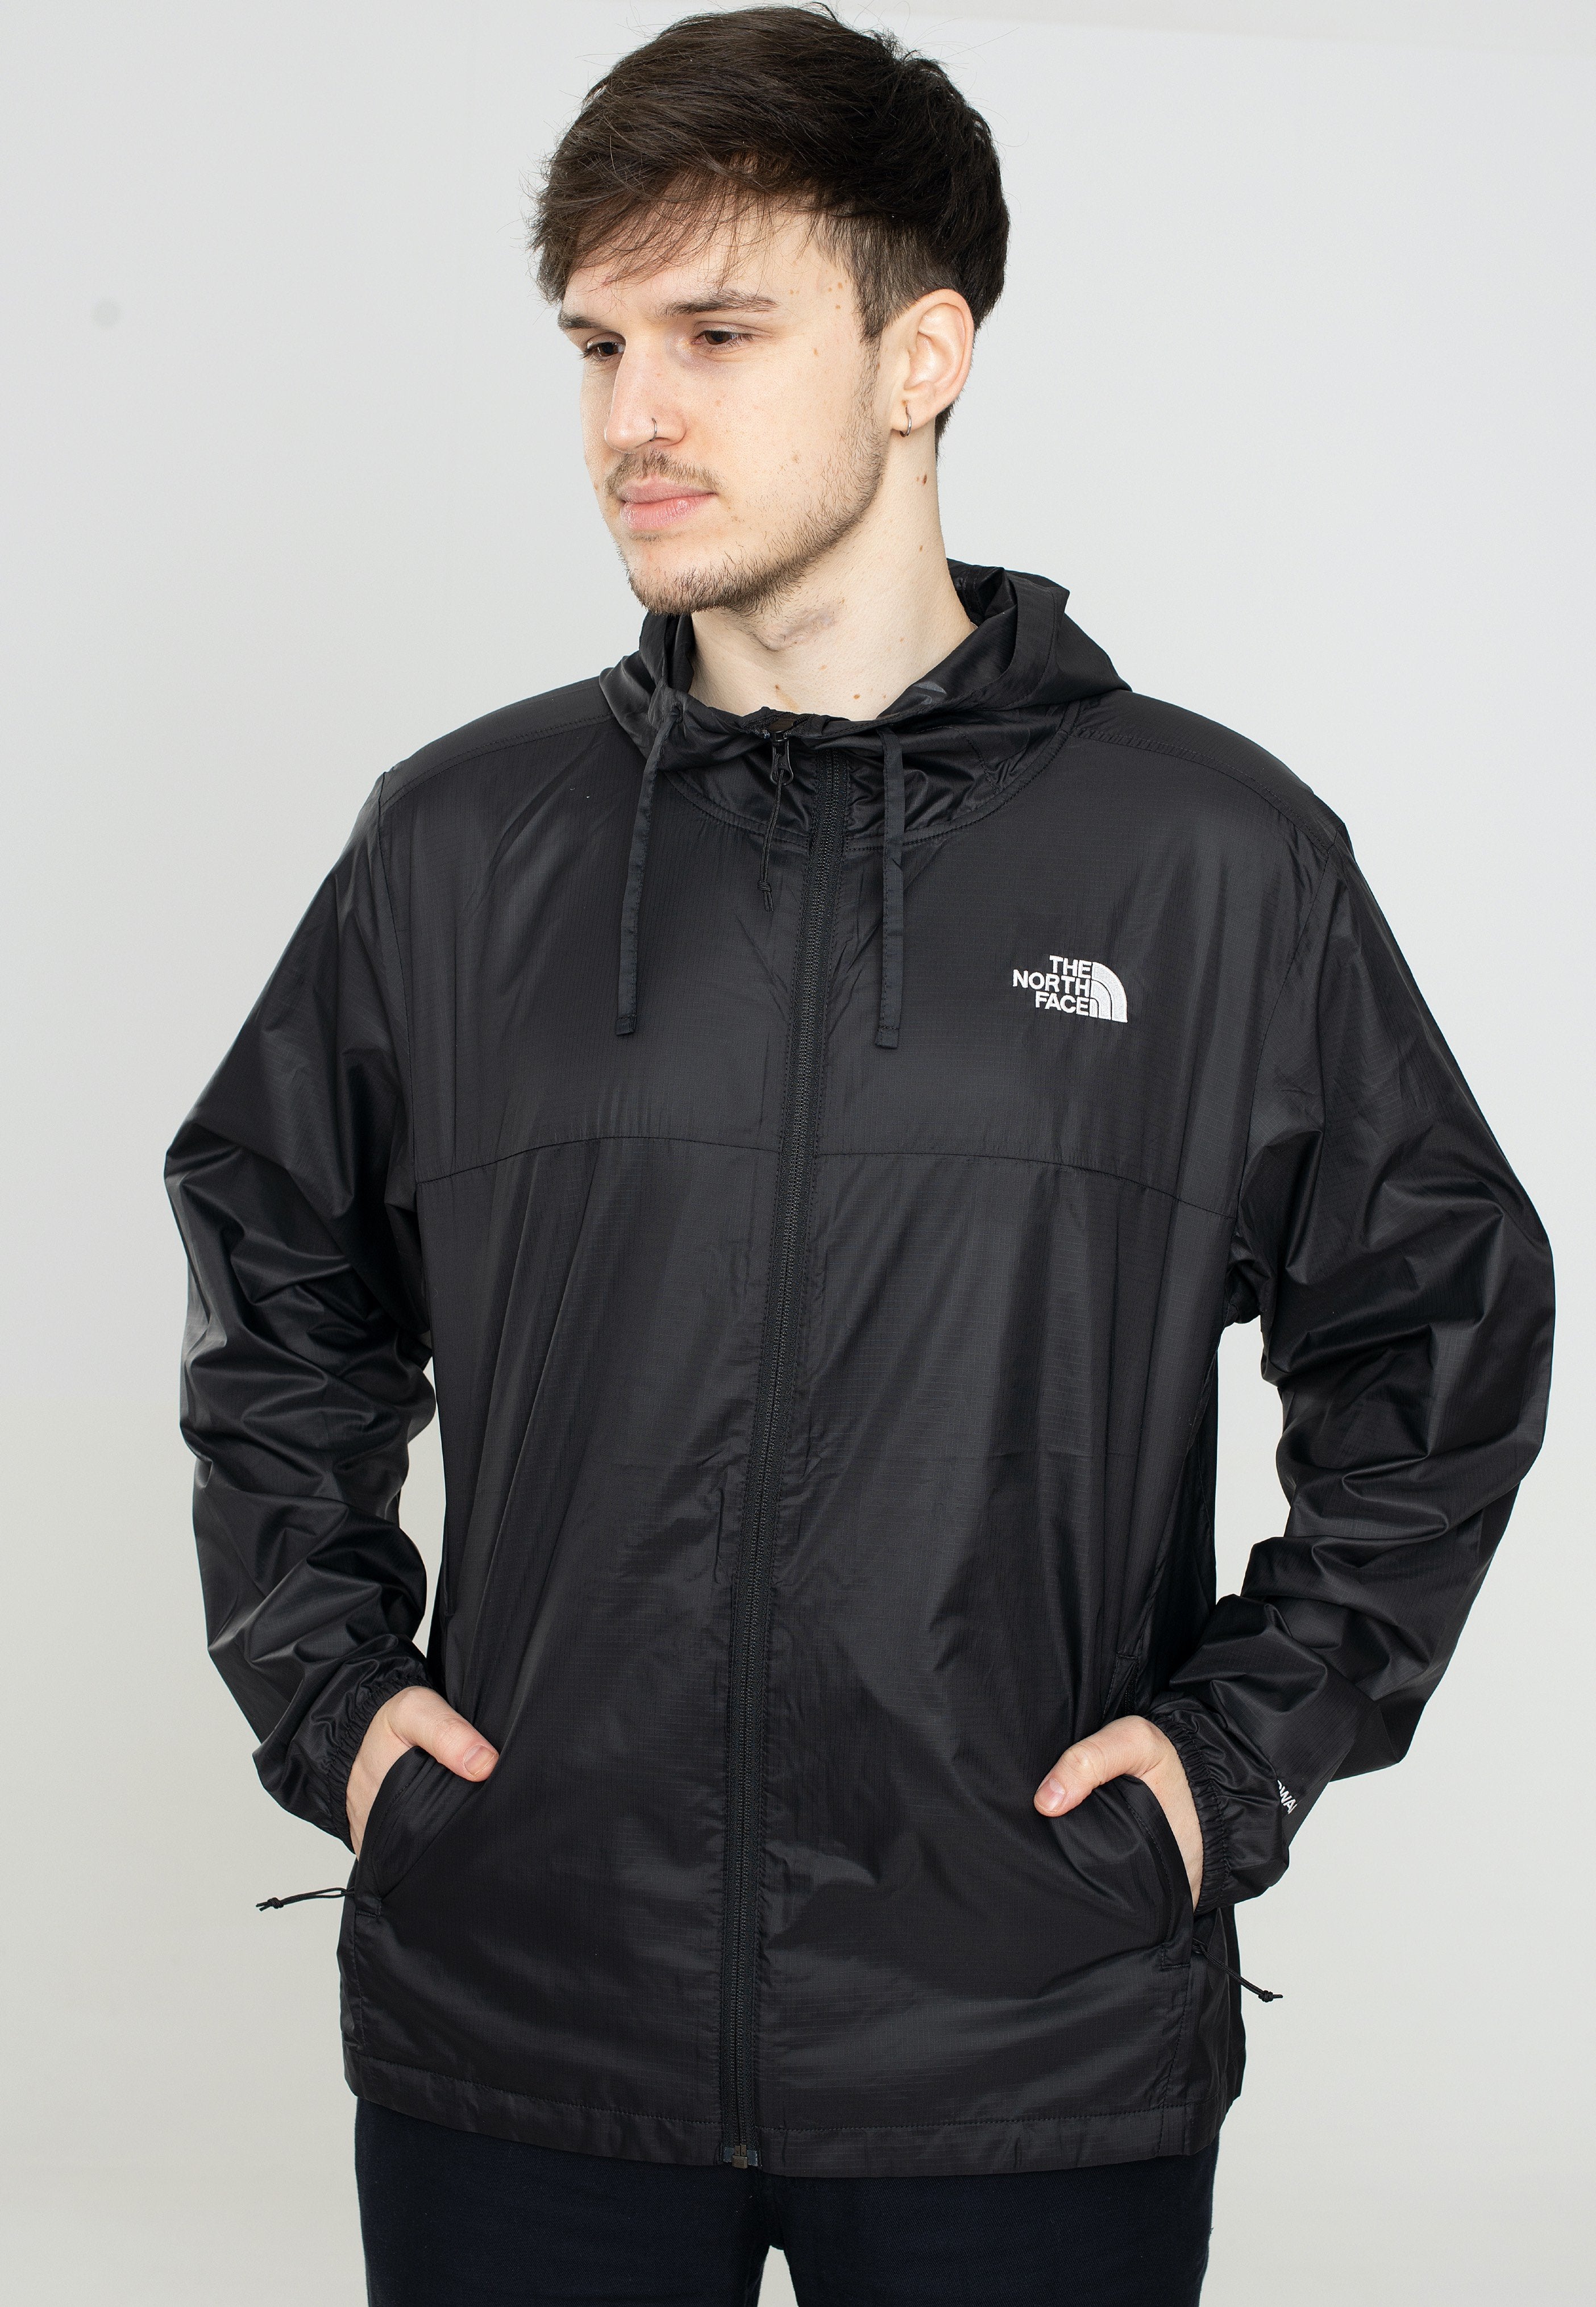 The North Face - Cyclone Jacket 3 Tnf Black - Jacket